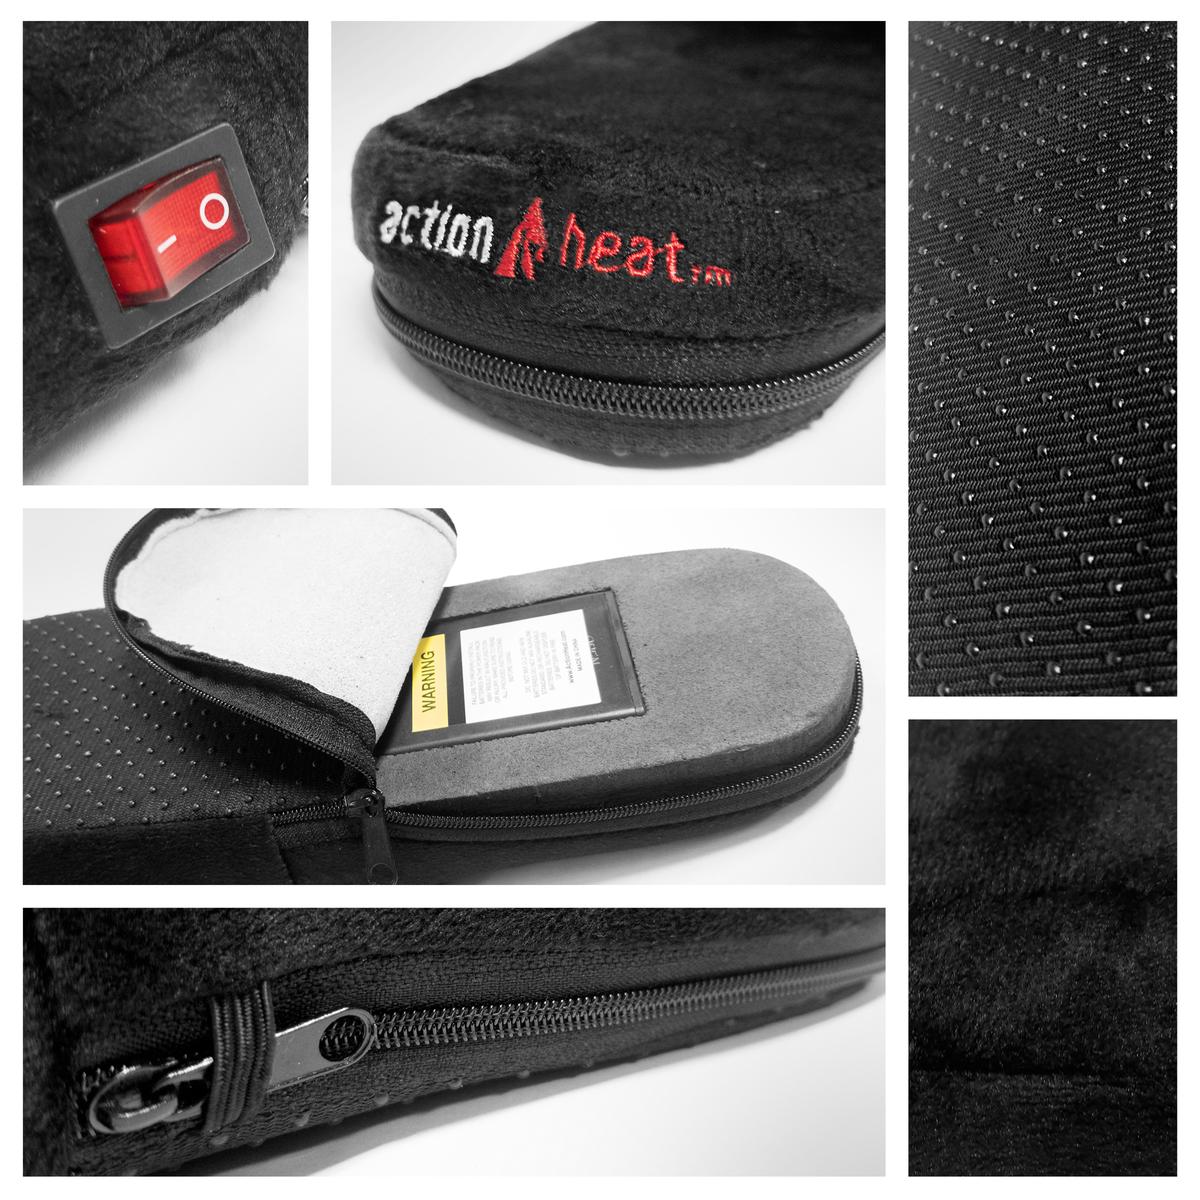 ActionHeat AA Battery Heated Slippers - Info